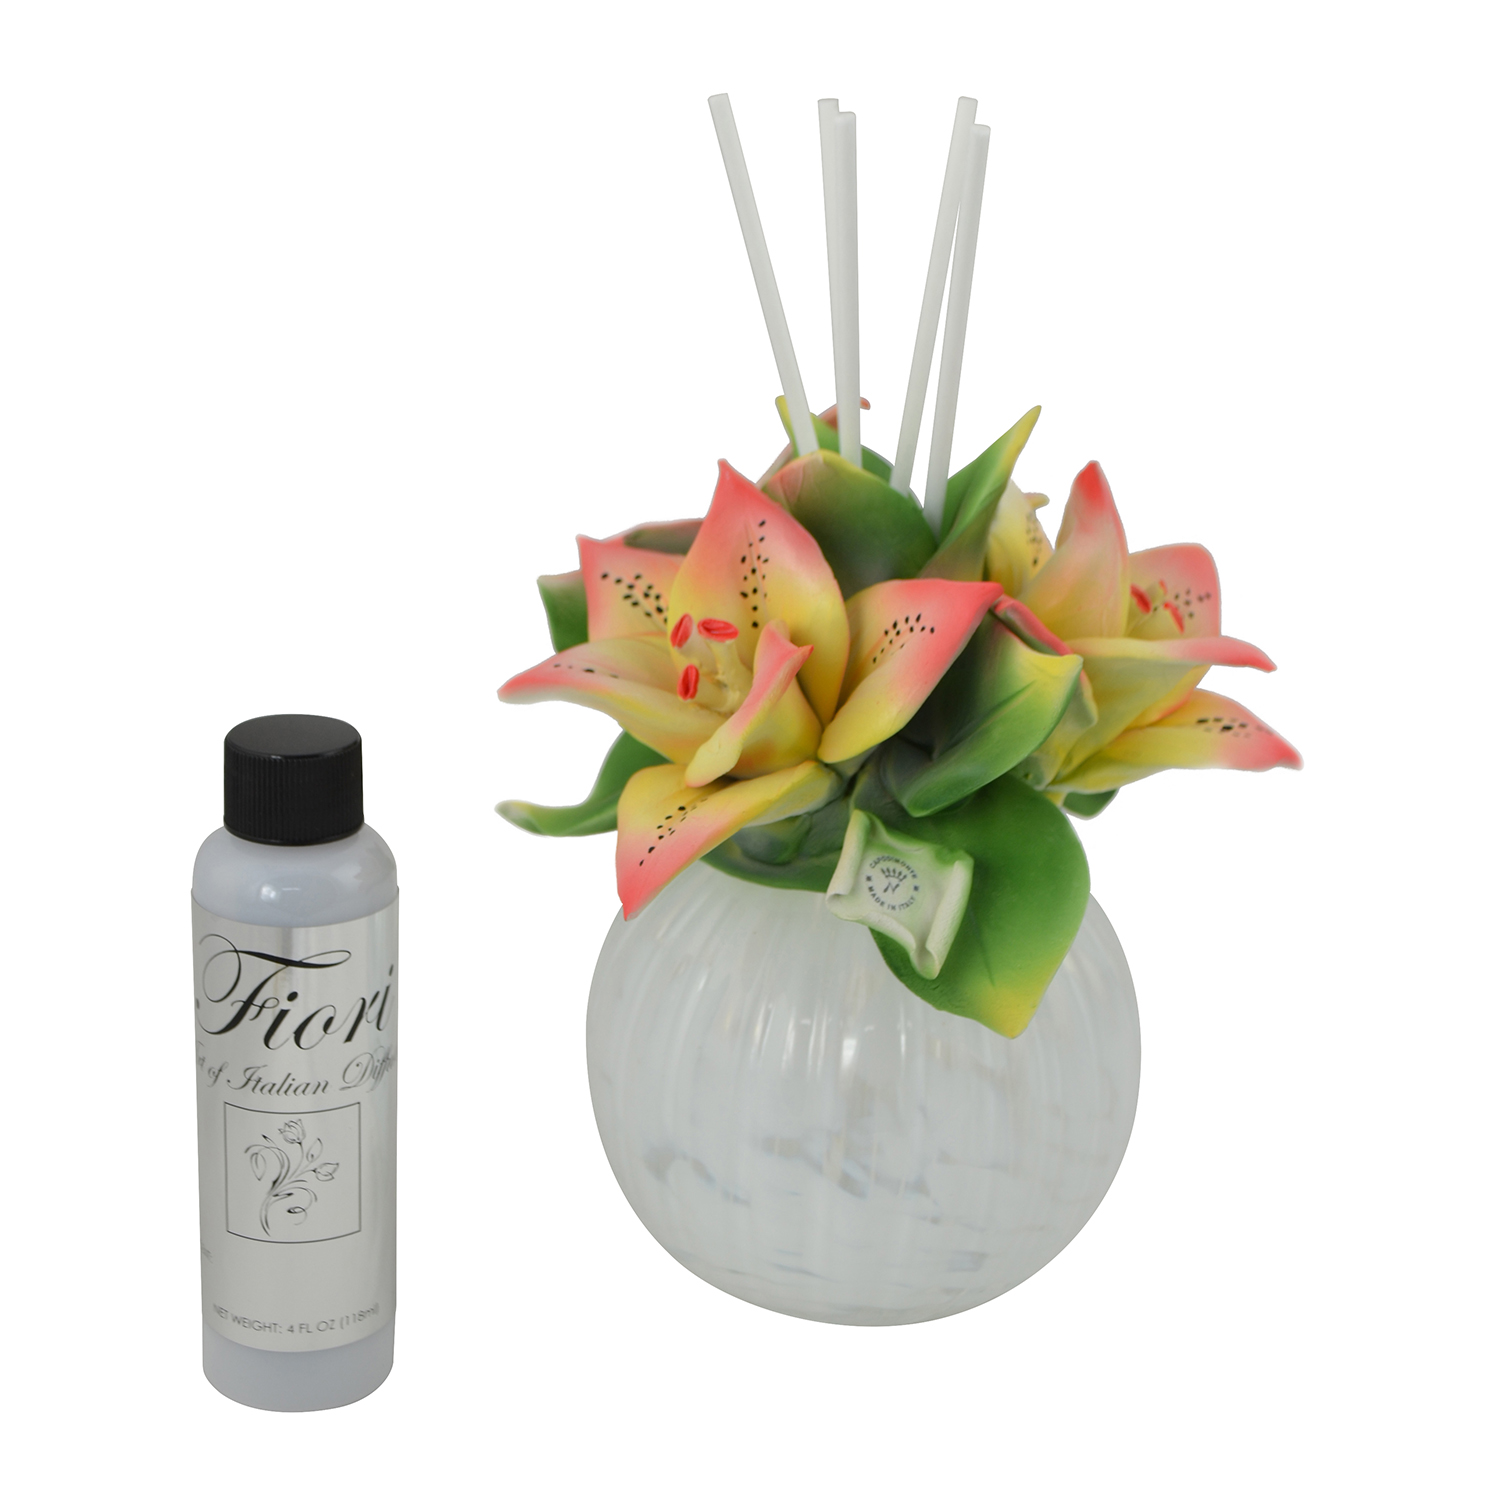 8" DIFFUSER W/ 3 PINK/YELLOW LILIES